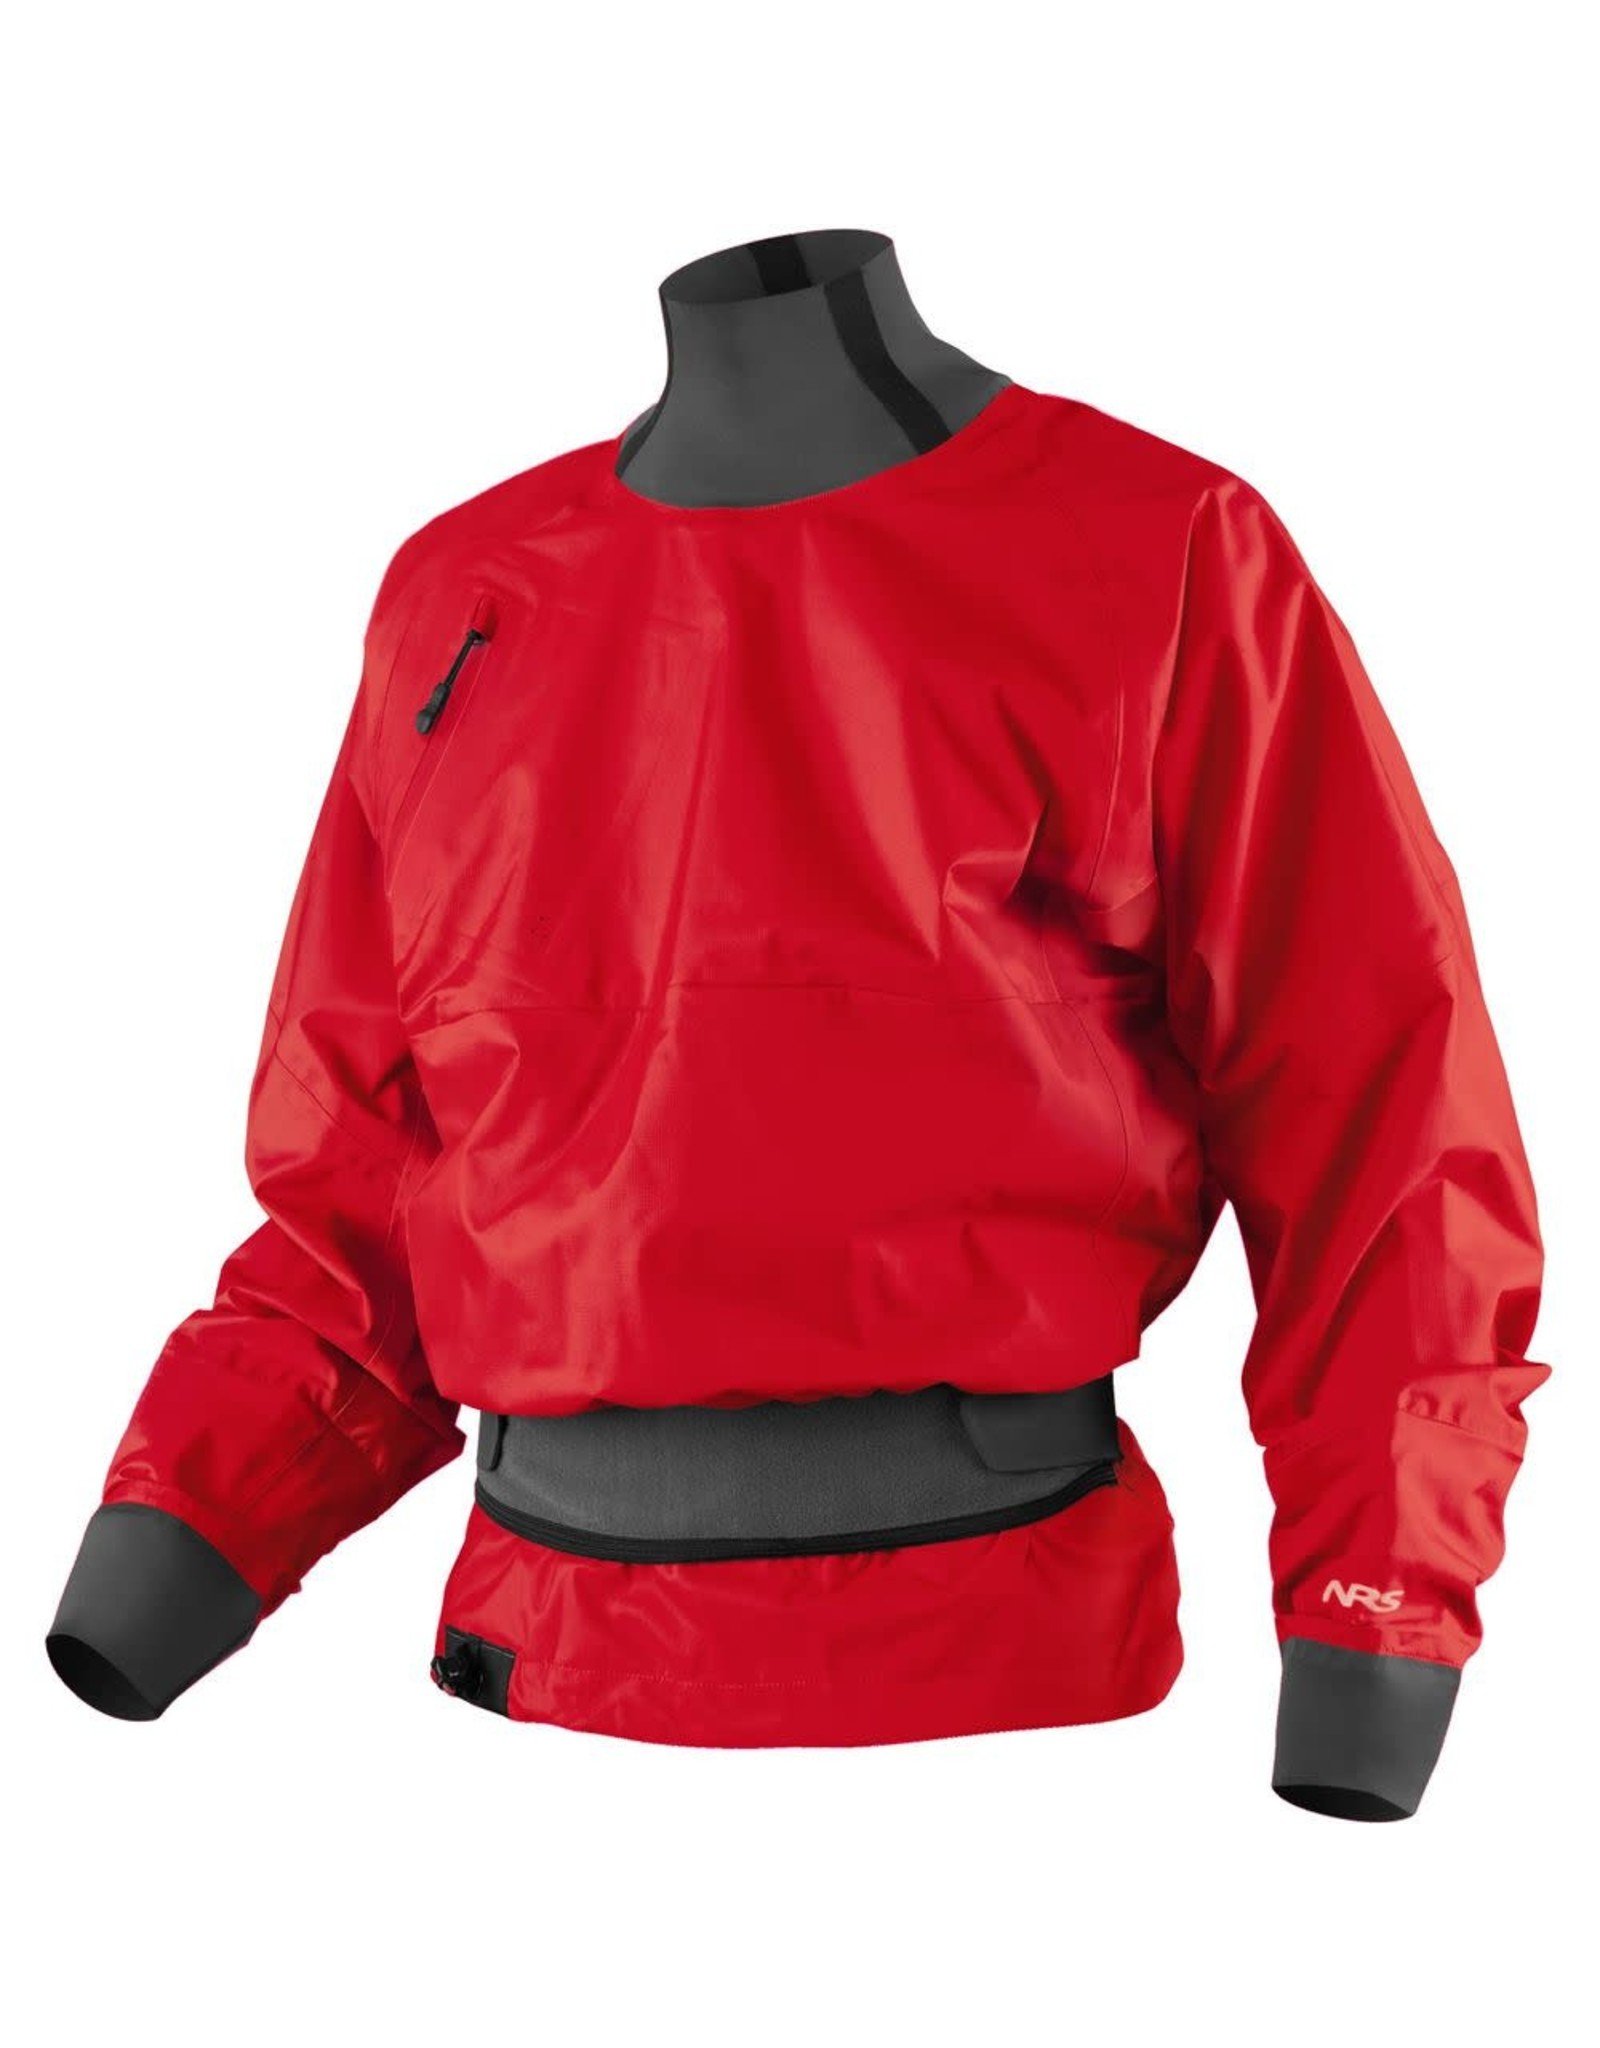 NRS NRS anorak Stratos Rouge (Salsa) manche longue